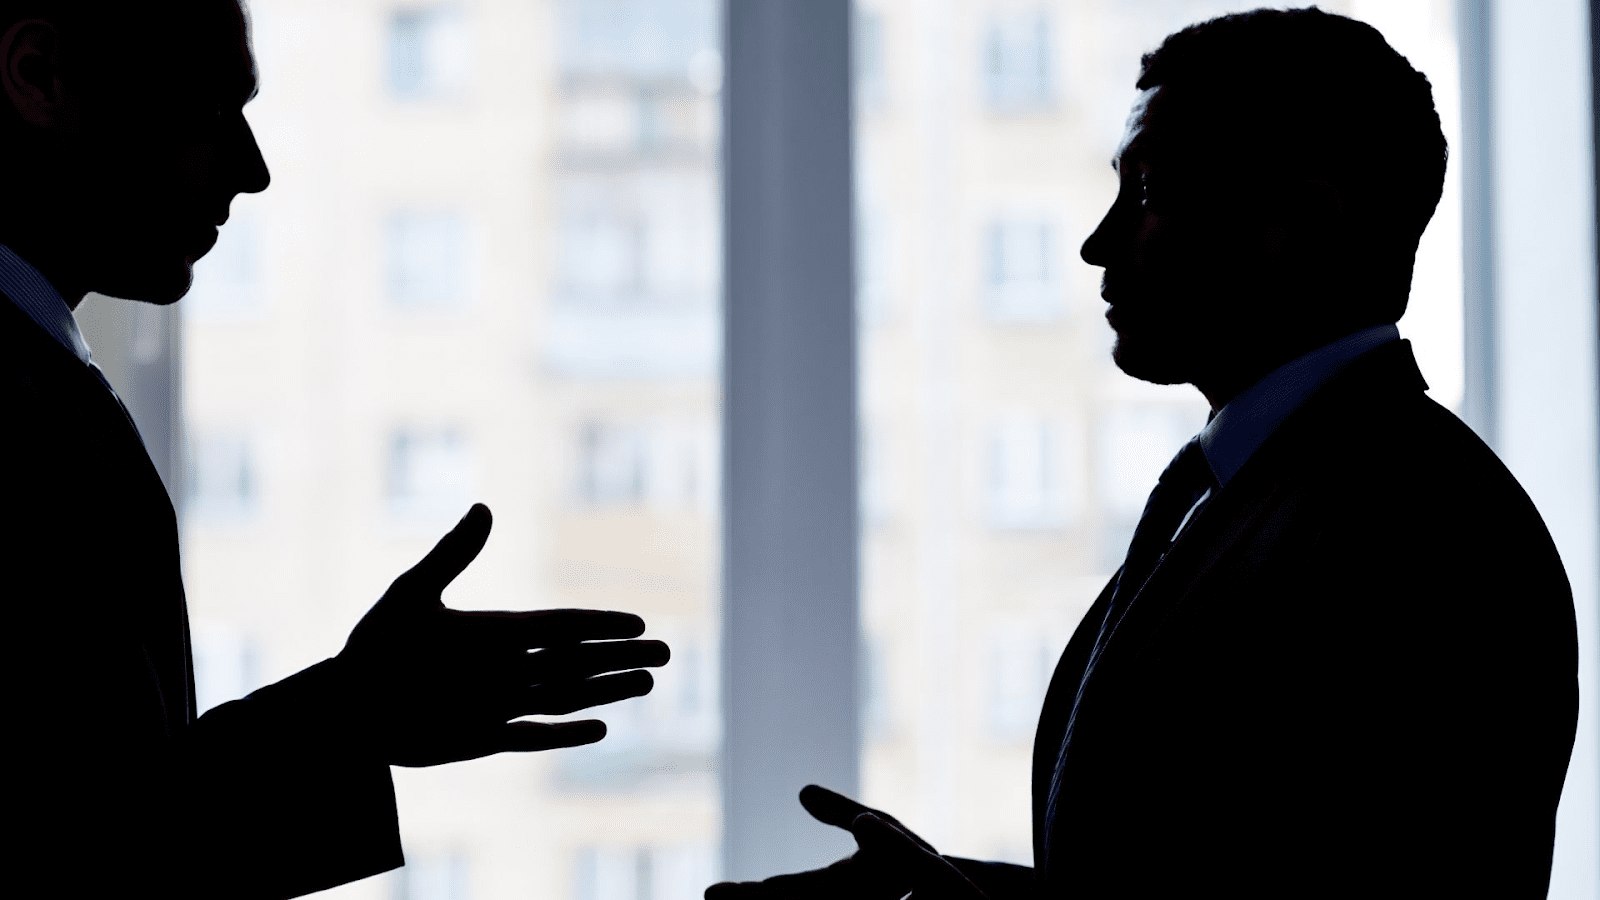 The image shows two silhouetted figures, presumably businessmen, in a discussion against the backdrop of a window with buildings visible outside. Their features are not discernible due to the backlighting, which creates a dramatic silhouette effect. One figure appears to be gesturing with their hand, indicating an active conversation or exchange of ideas. The context suggests a professional setting, possibly relating to corporate, legal, or financial matters.